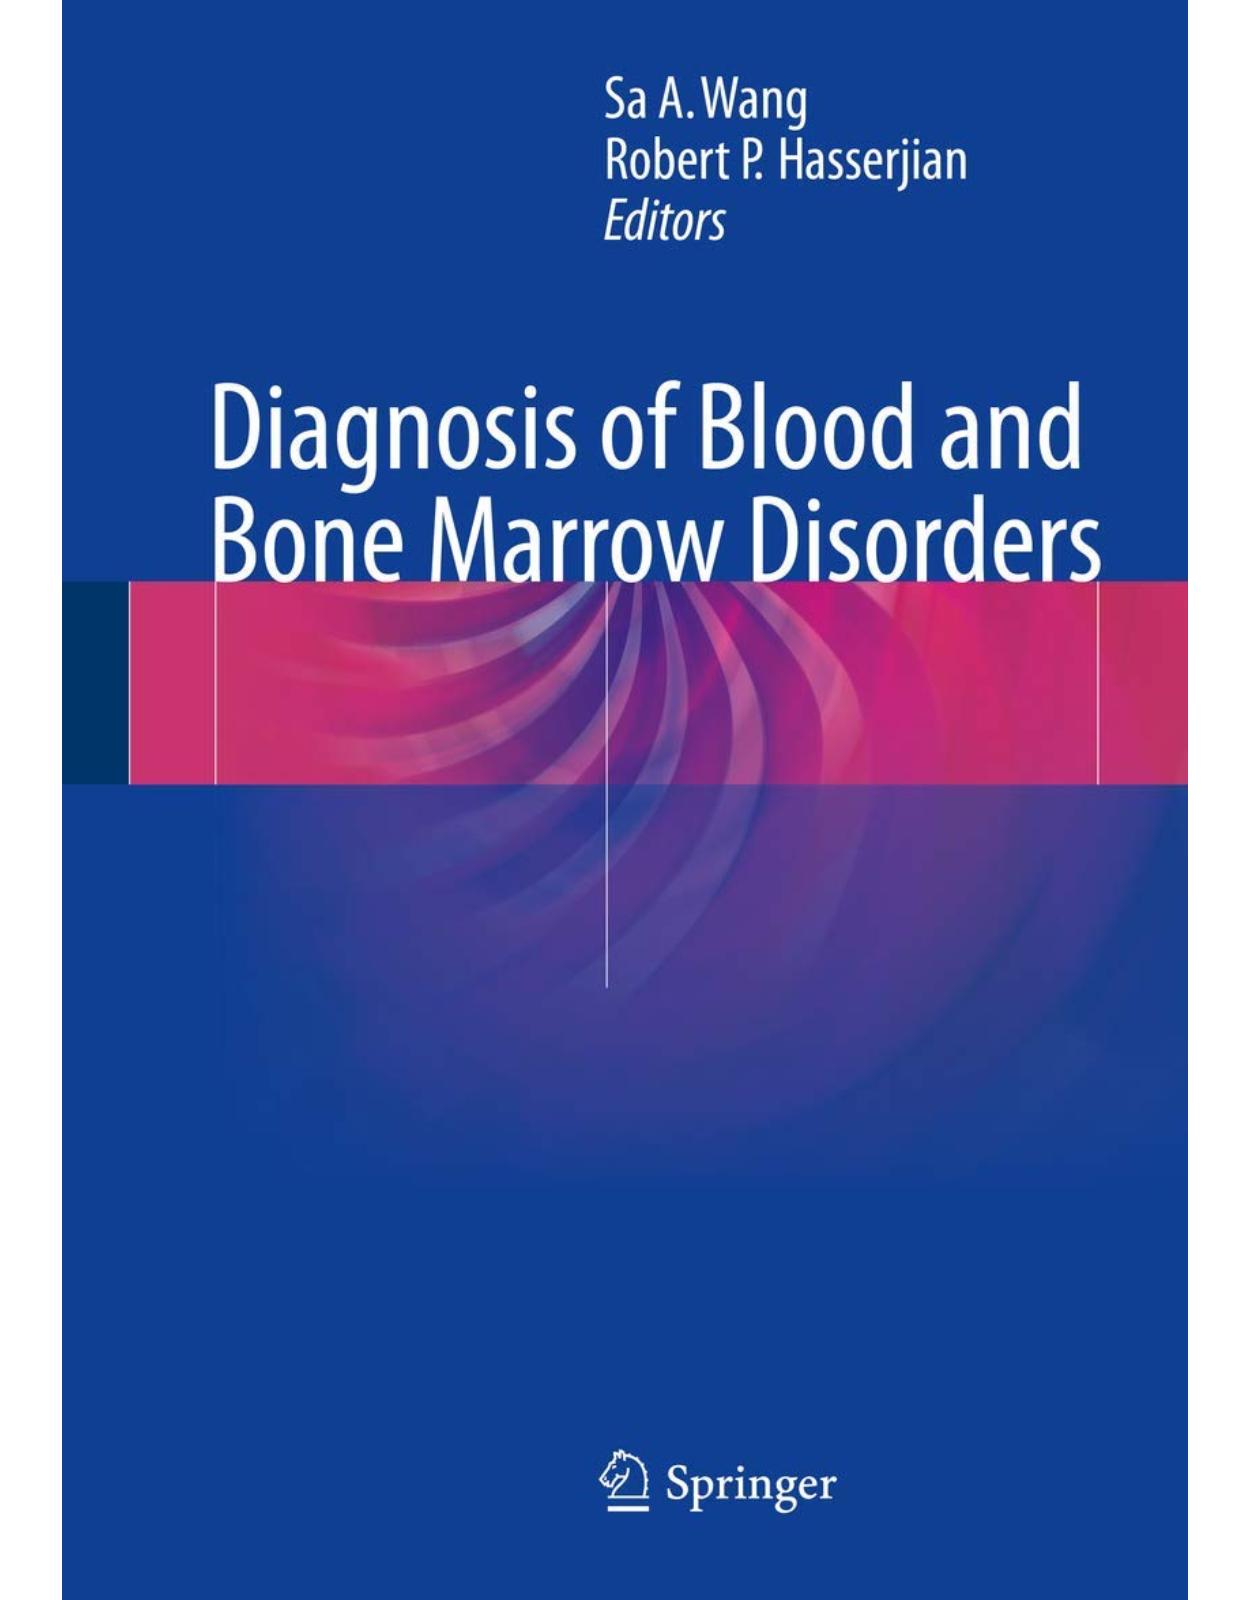 Diagnosis of Blood and Bone Marrow Disorders. Edition: 1